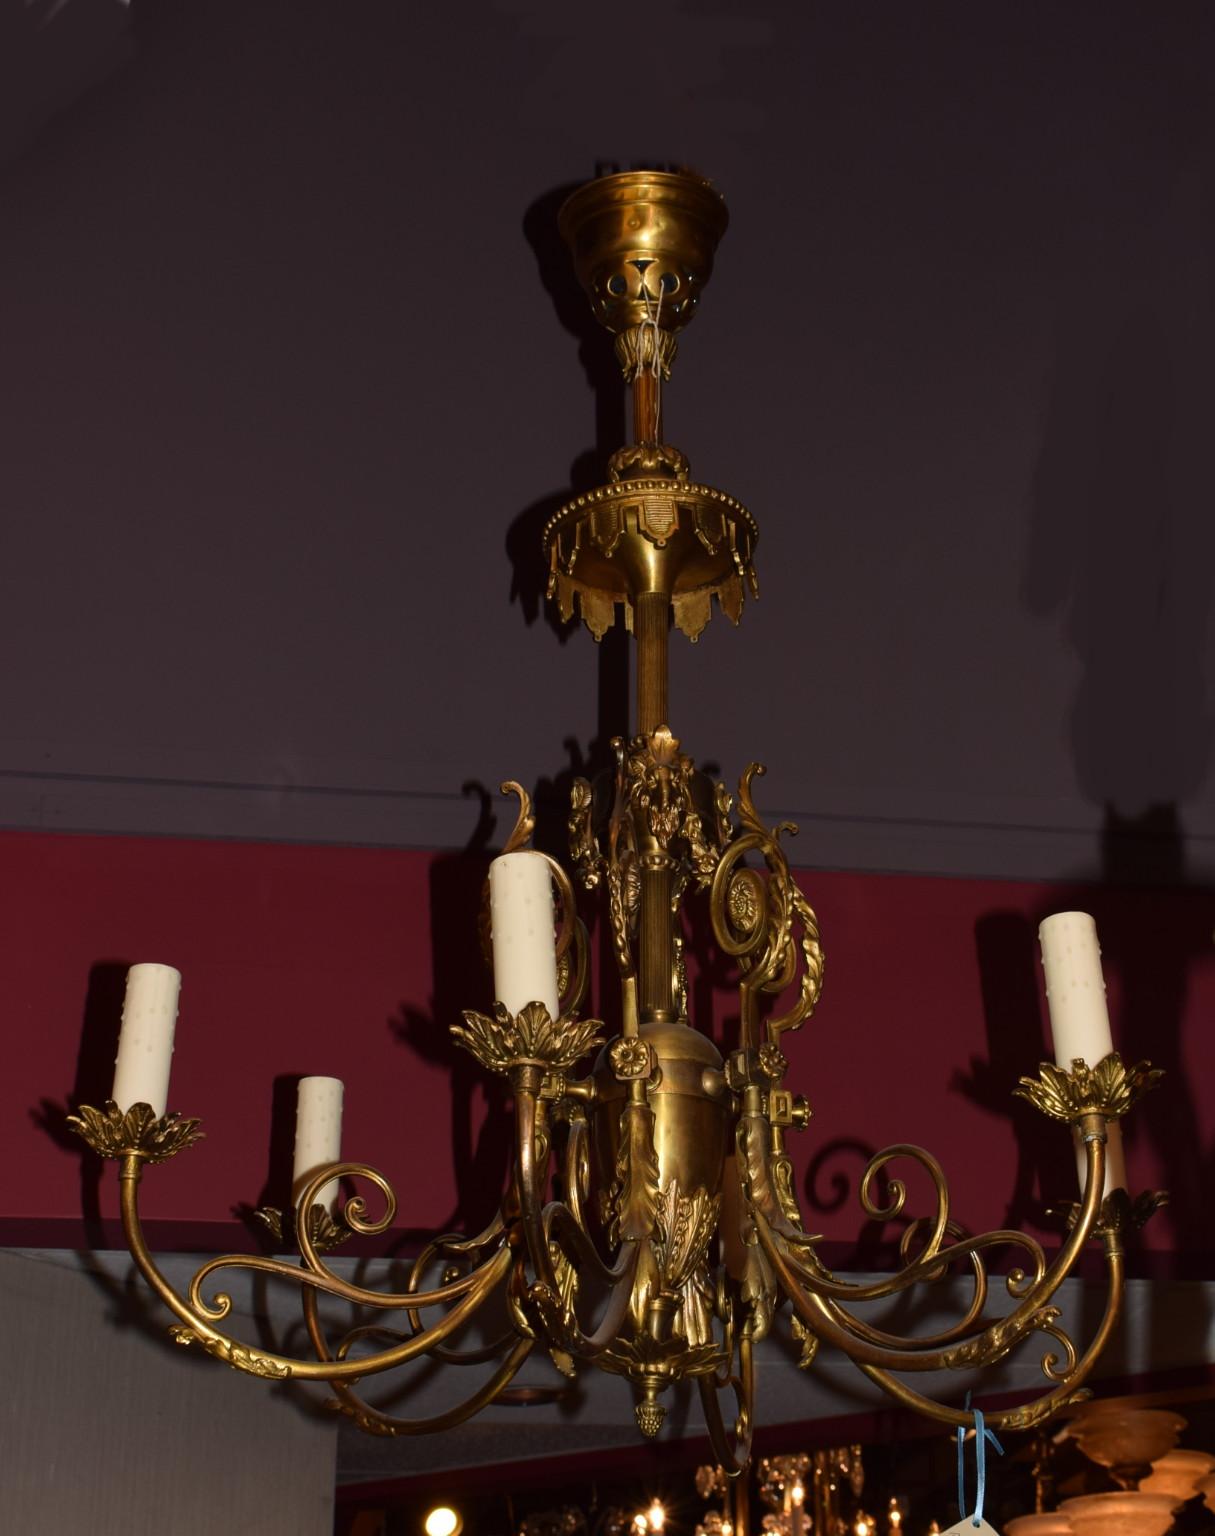 A fine and decorative bronze chandelier. Oval center issuing six U-shaped arms, central rod ornated with ram's heads. 6-light, France, circa 1900
Dimensions: Height 39